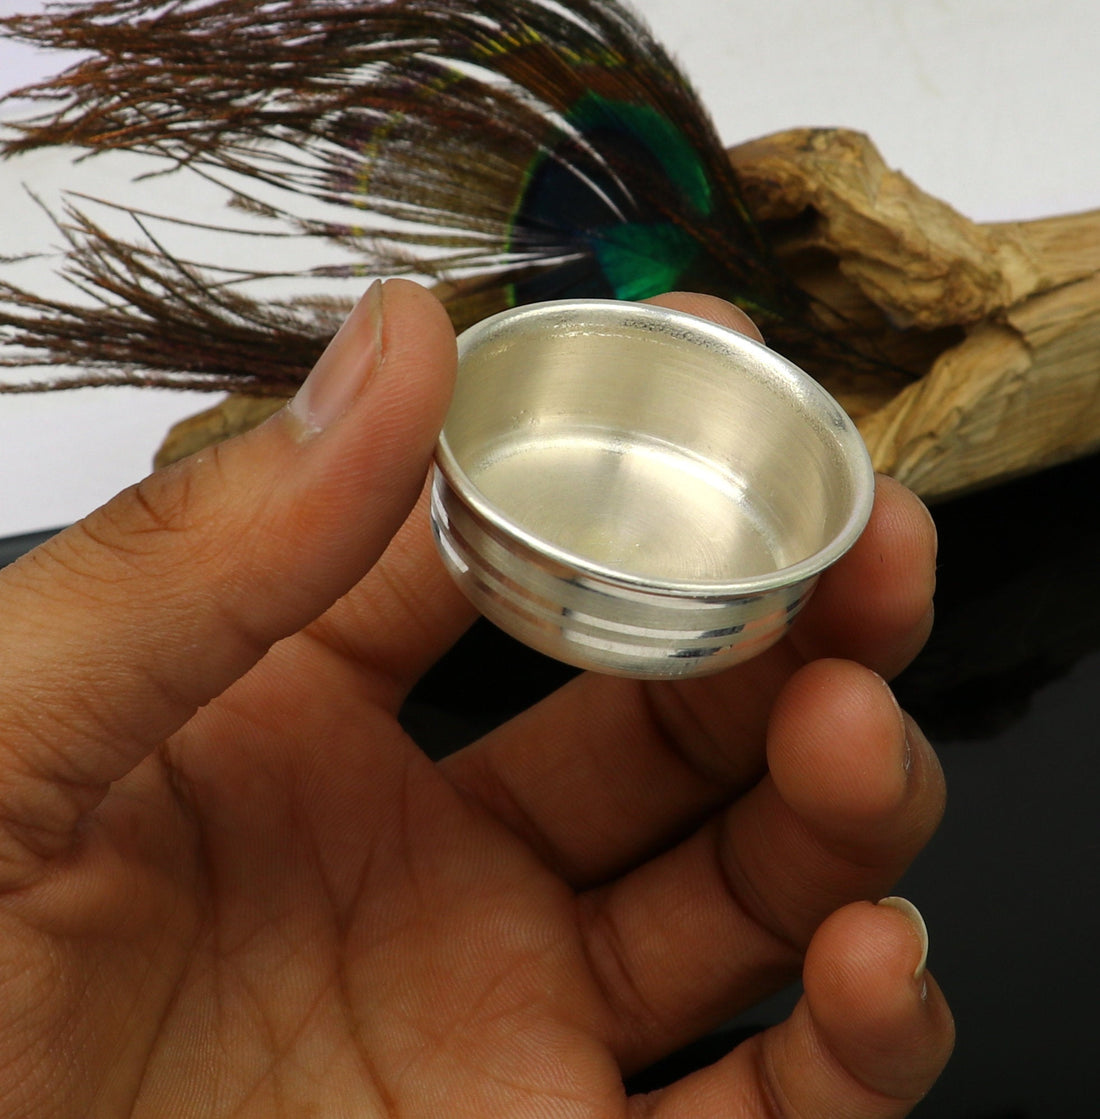 999 fine solid silver handmade small bowl for baby or temple puja, pure silver vessels, silver utensils, temple accessories india sv102 - TRIBAL ORNAMENTS